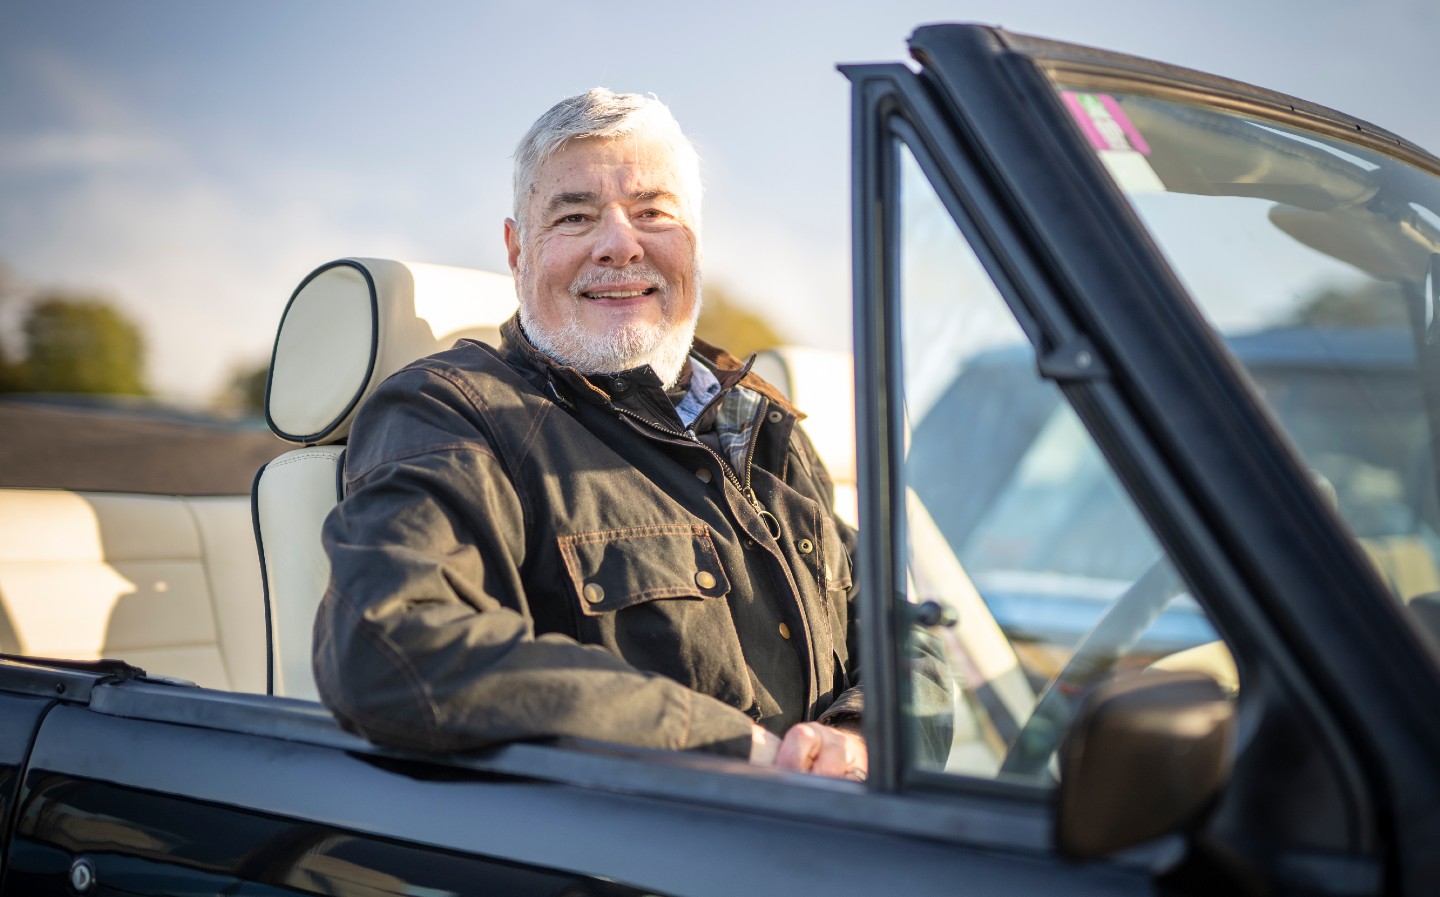 Range Rover at 50: From a Royal Rangie to one bought by a member of Queen, meet the star cars and their owners - David Barker and Roger Taylor's convertible Range Rover 